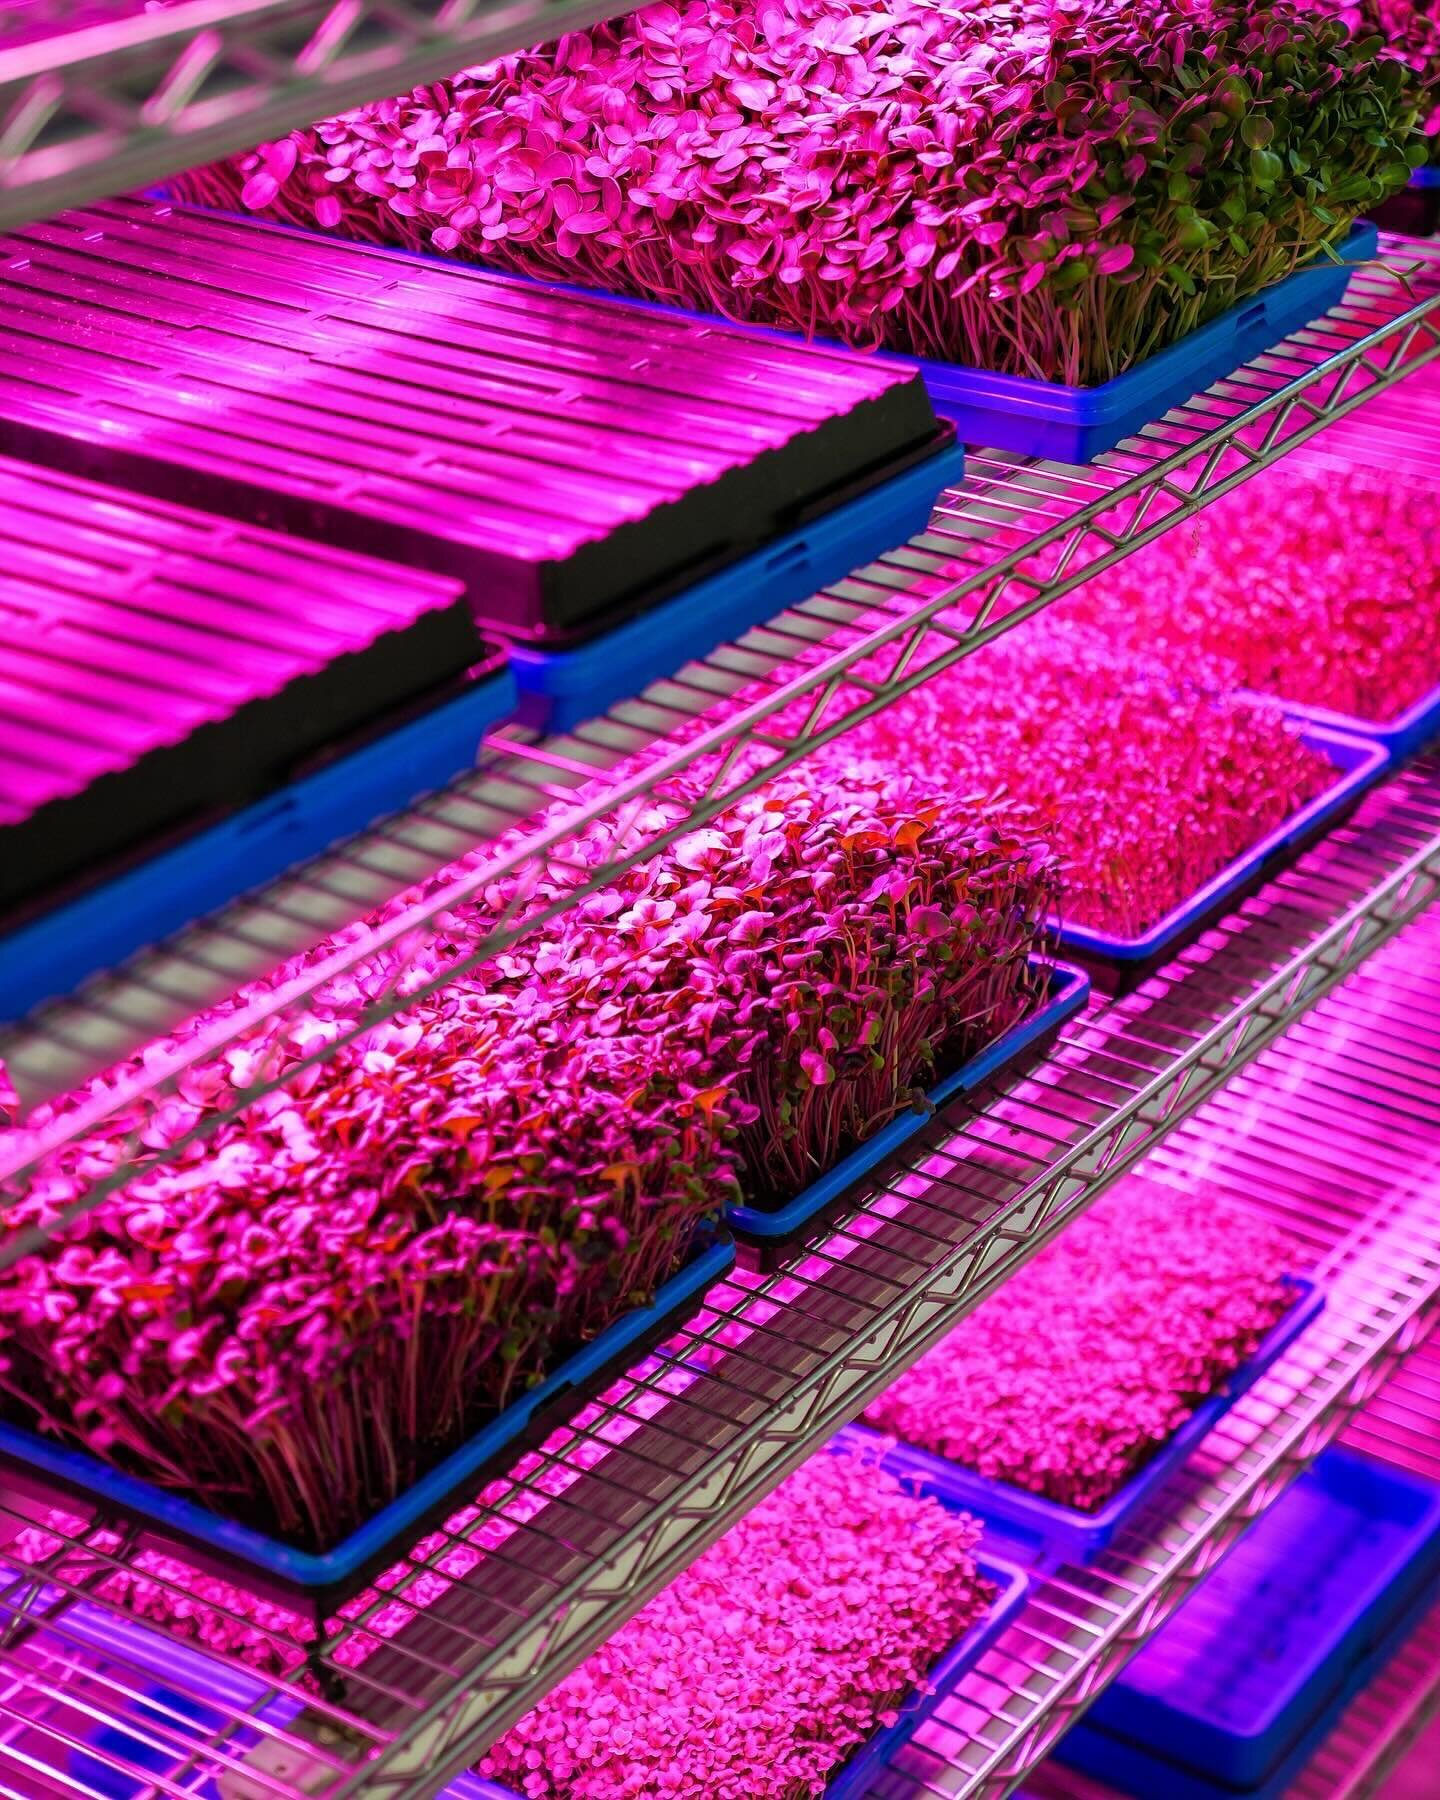 💚 We have 5 varieties of microgreens and shoots and shoots heading to the market this weekend!  Micro in size, but big in flavor and nutrients!  Top them on a salad, swap for lettuce on a sandwich, or use them to brighten up a soup or saut&eacute;e 